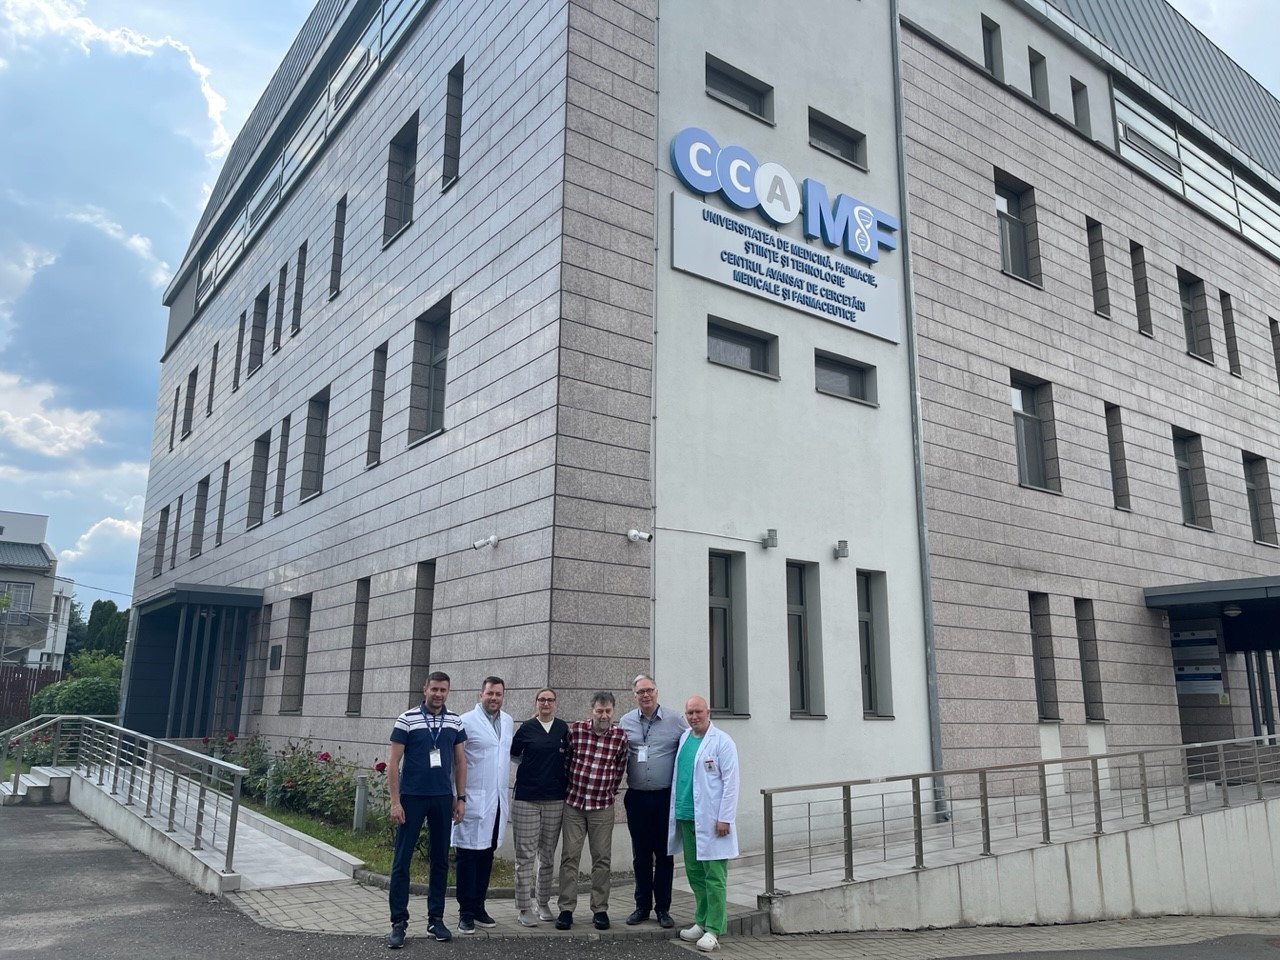 A group of people, five men and one woman, stand shoulder to shoulder in front of a four storey brick building with a sign in Romanian, indicating the building is a centre for medical research.